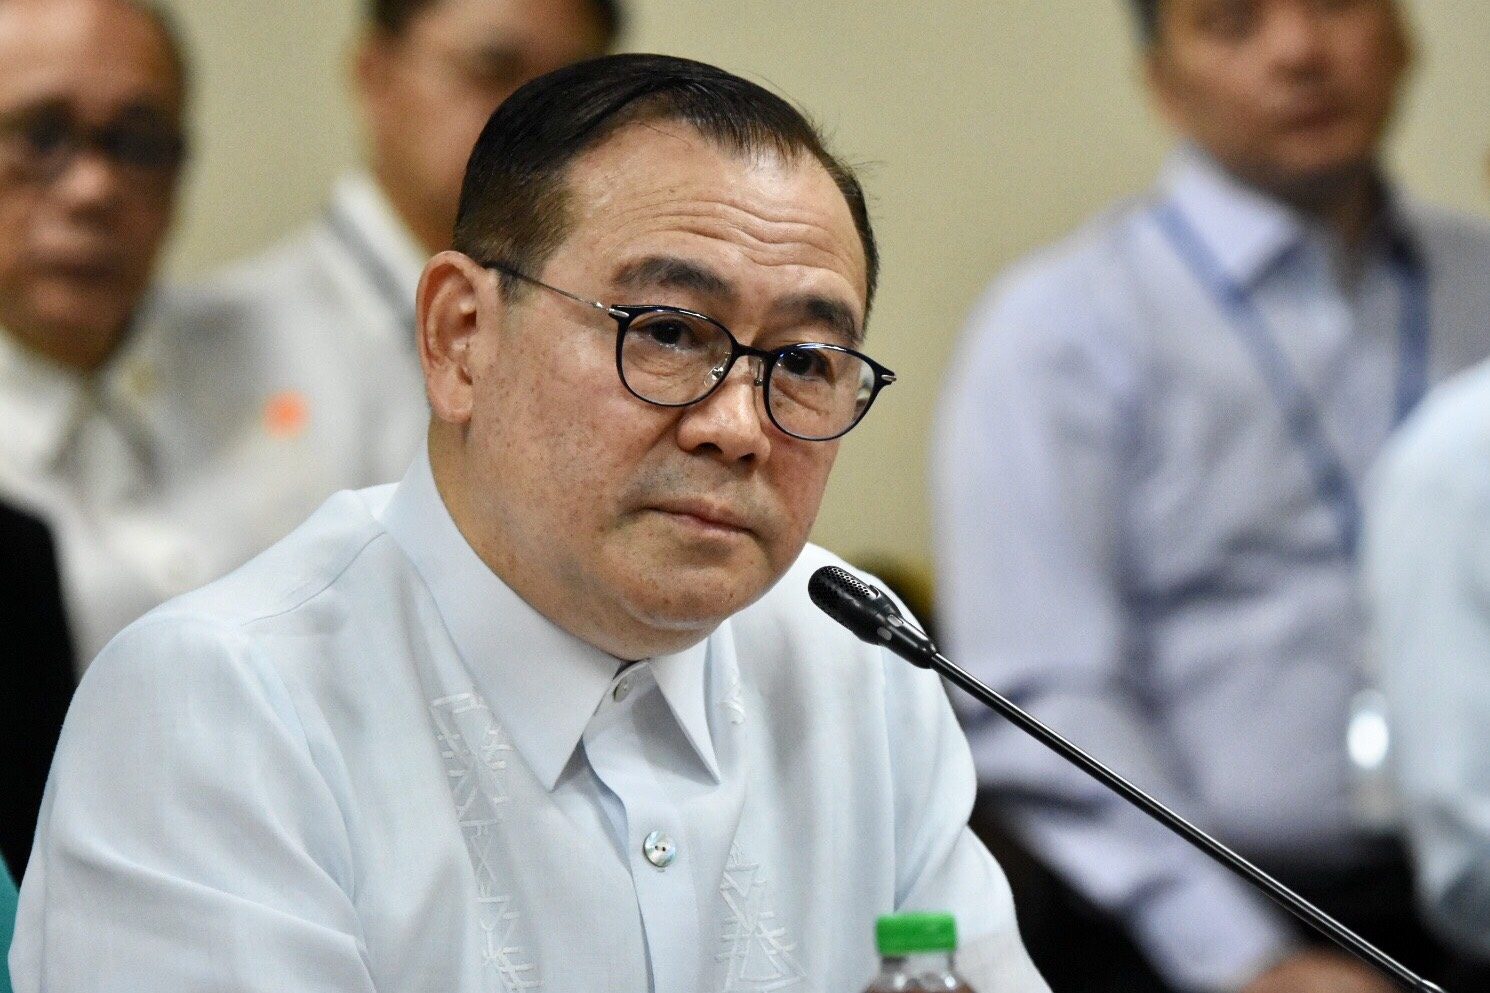 Despite criticism, Locsin demands apology from Inquirer reporter